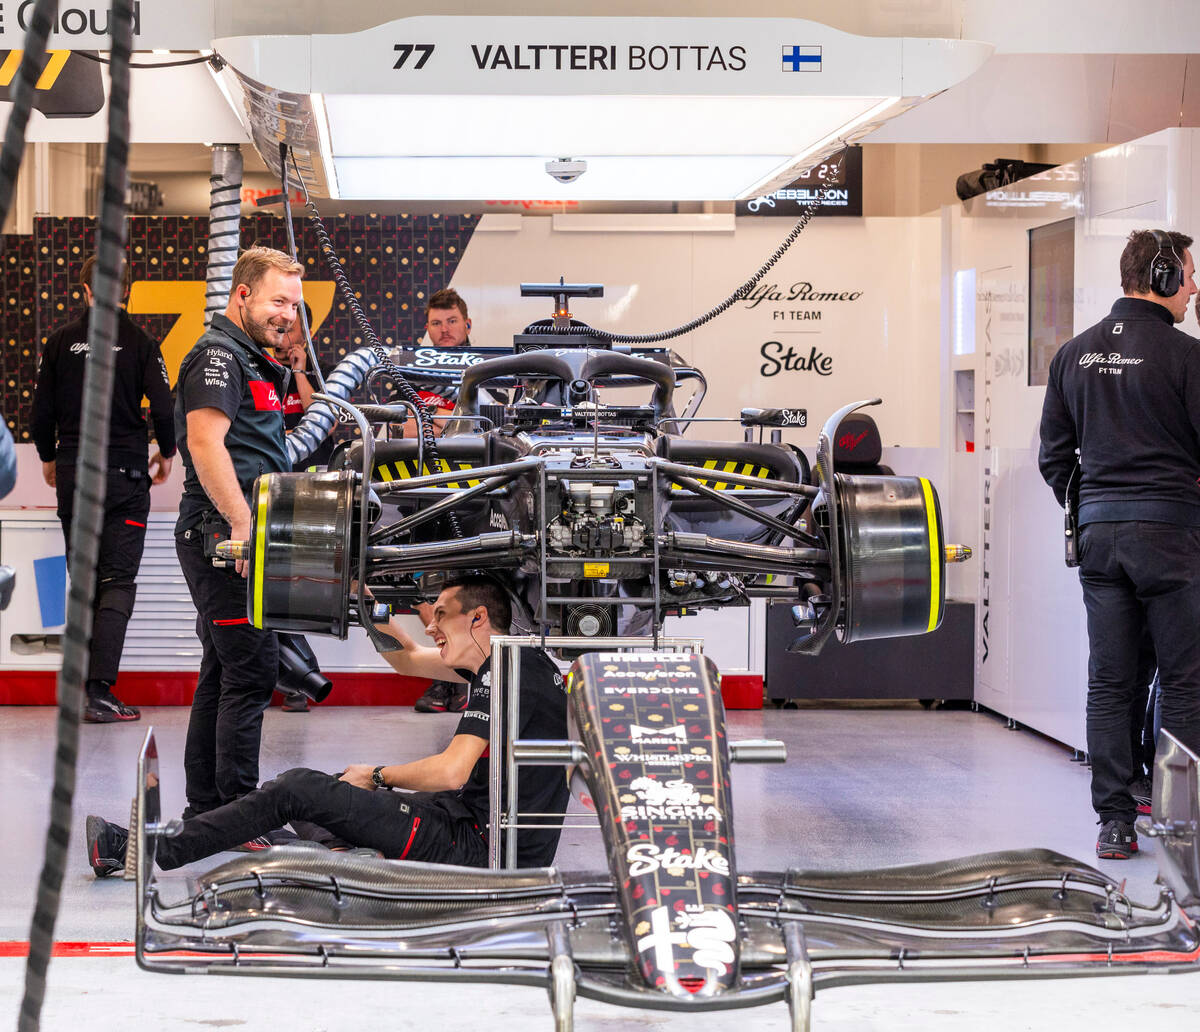 A crew from Valtteri Bottas of Alpha Romero work to make repairs in the pit building during the ...